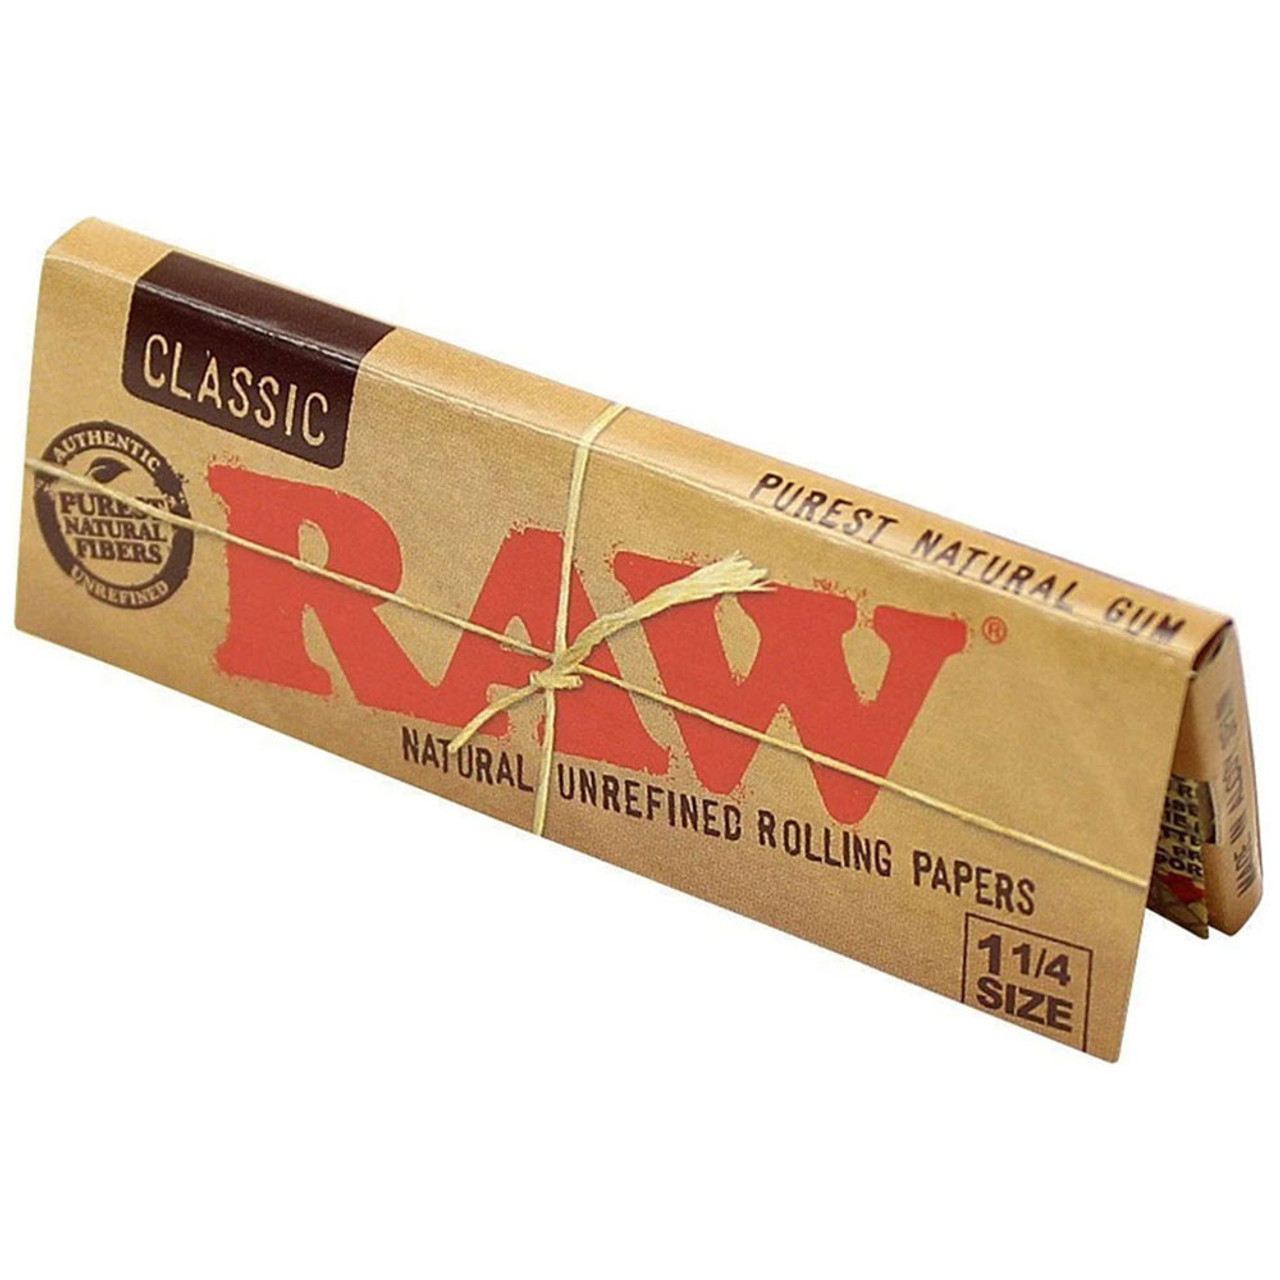 https://cdn11.bigcommerce.com/s-1n8r405nxd/images/stencil/1280x1280/products/3617/16340/86224-F1-Raw-125-One-Quarter-Rolling-Paper-Pure-Natural-Fiber-Organic-Thin-Slow-Product-Quarter__14445.1646850332.jpg?c=2